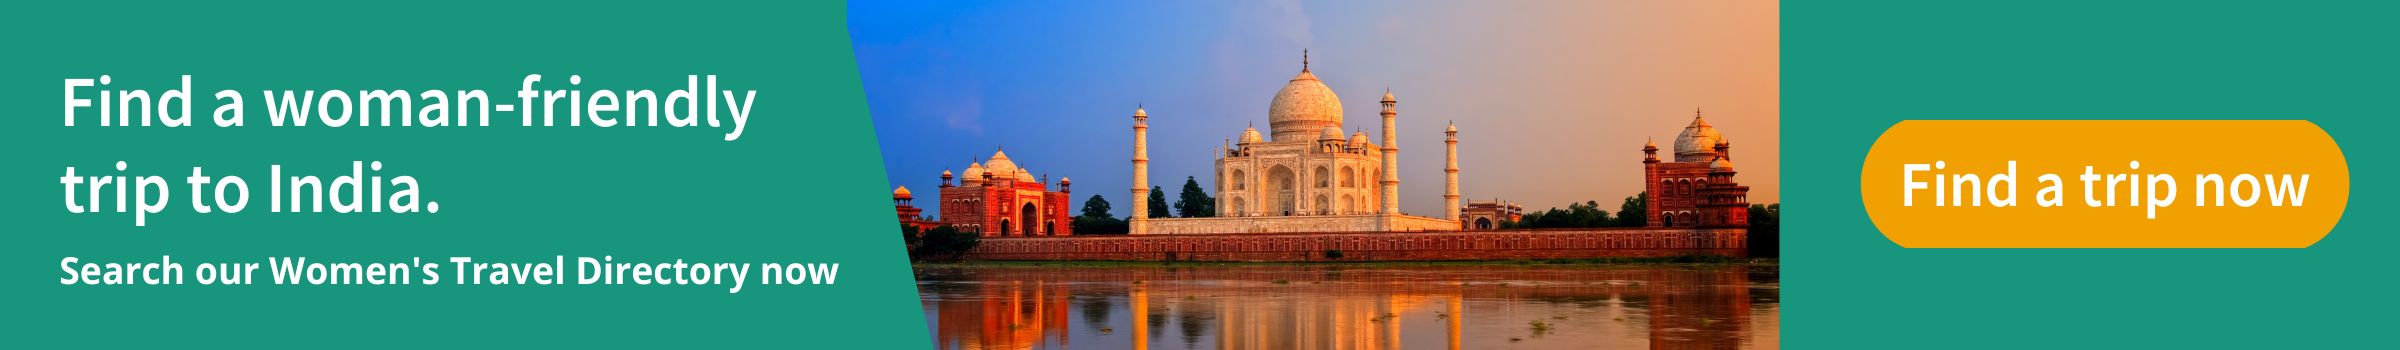 Find a women-friendly trip to India!